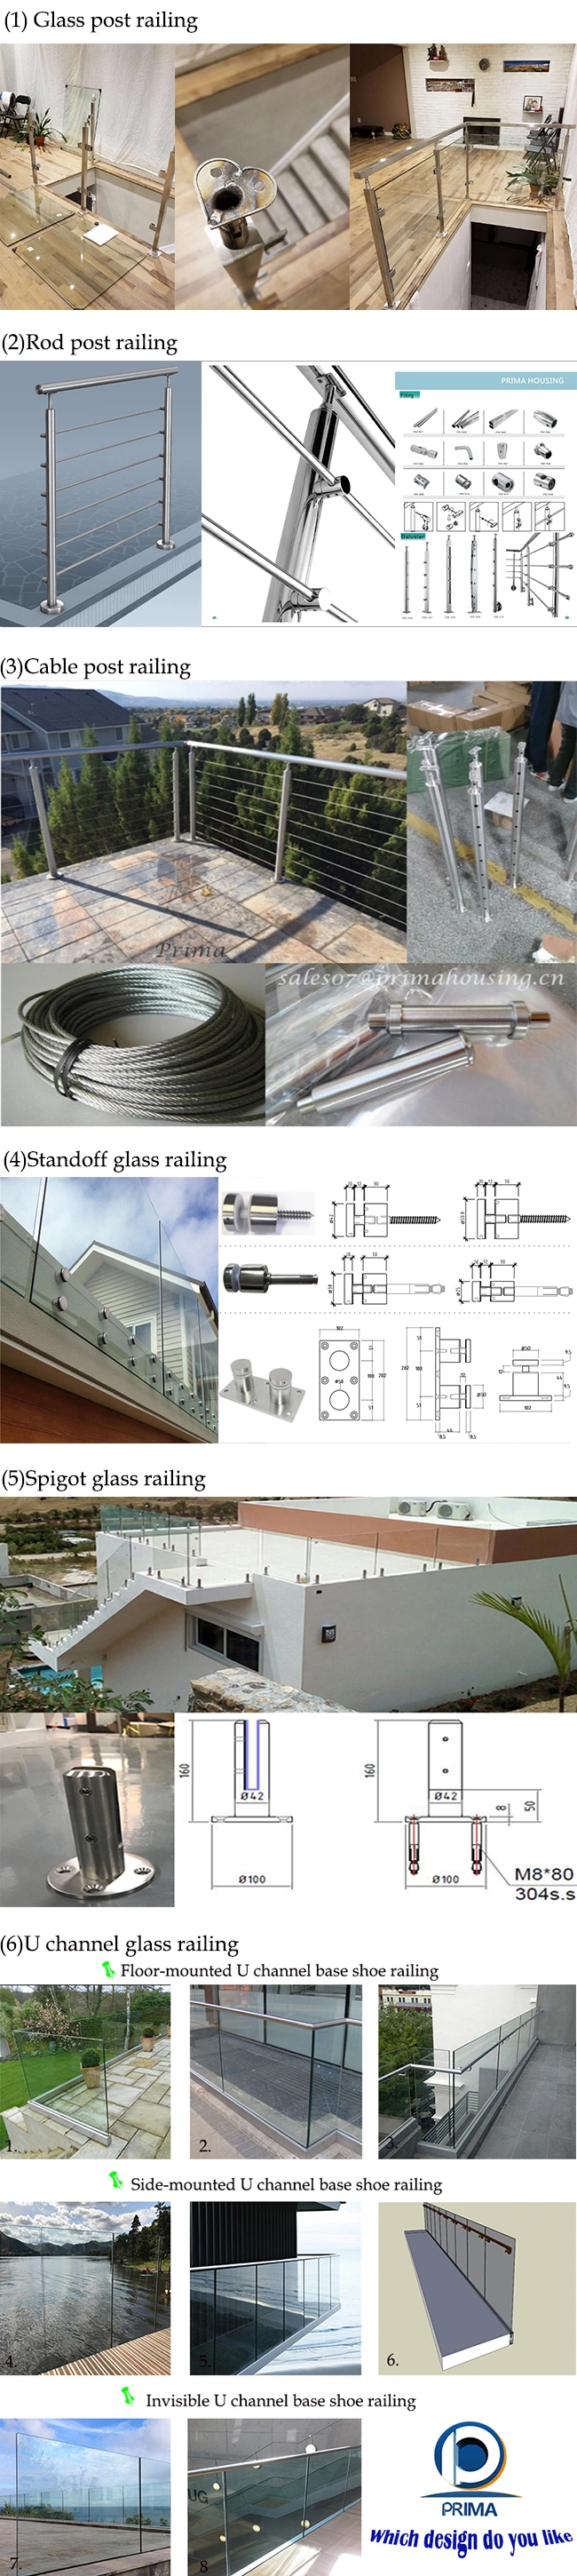 Deck Wire Rope Balustrade Wire Post Handrail Terrace Stainless Steel Tensioner Cable Railing Systems